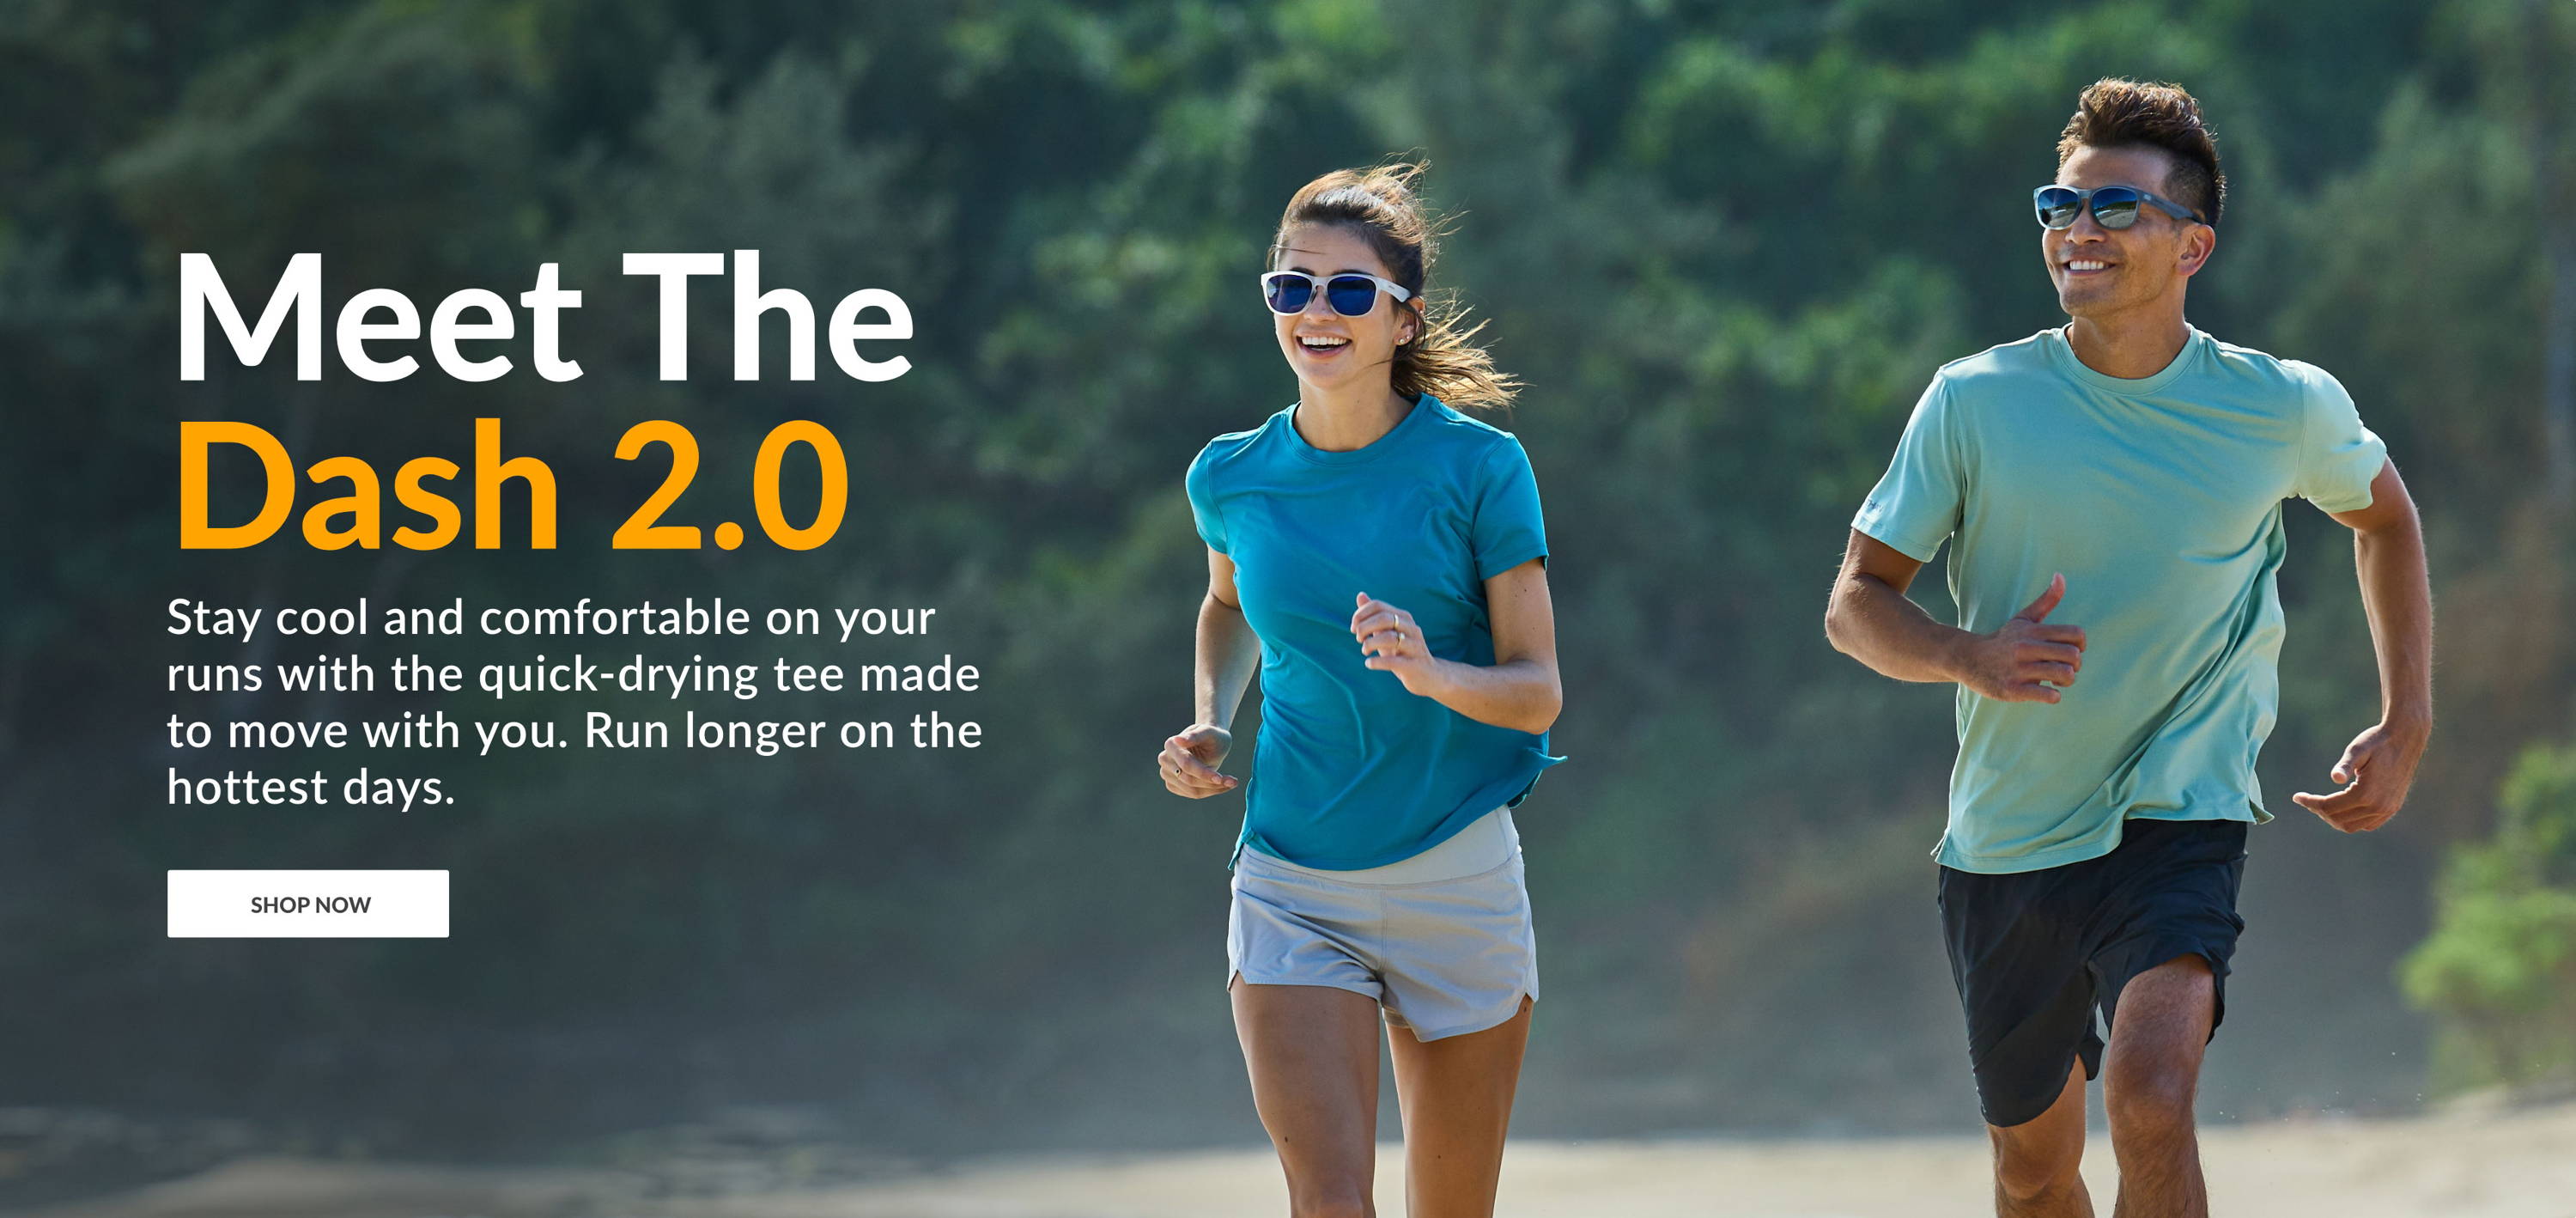 Meet The Dash 2.0 - Stay Cool and Comfortable  On Your Runs With  The Quick-Drying Tee Made To Move With You. Run Longer On The Hottest Days - SHOP NOW